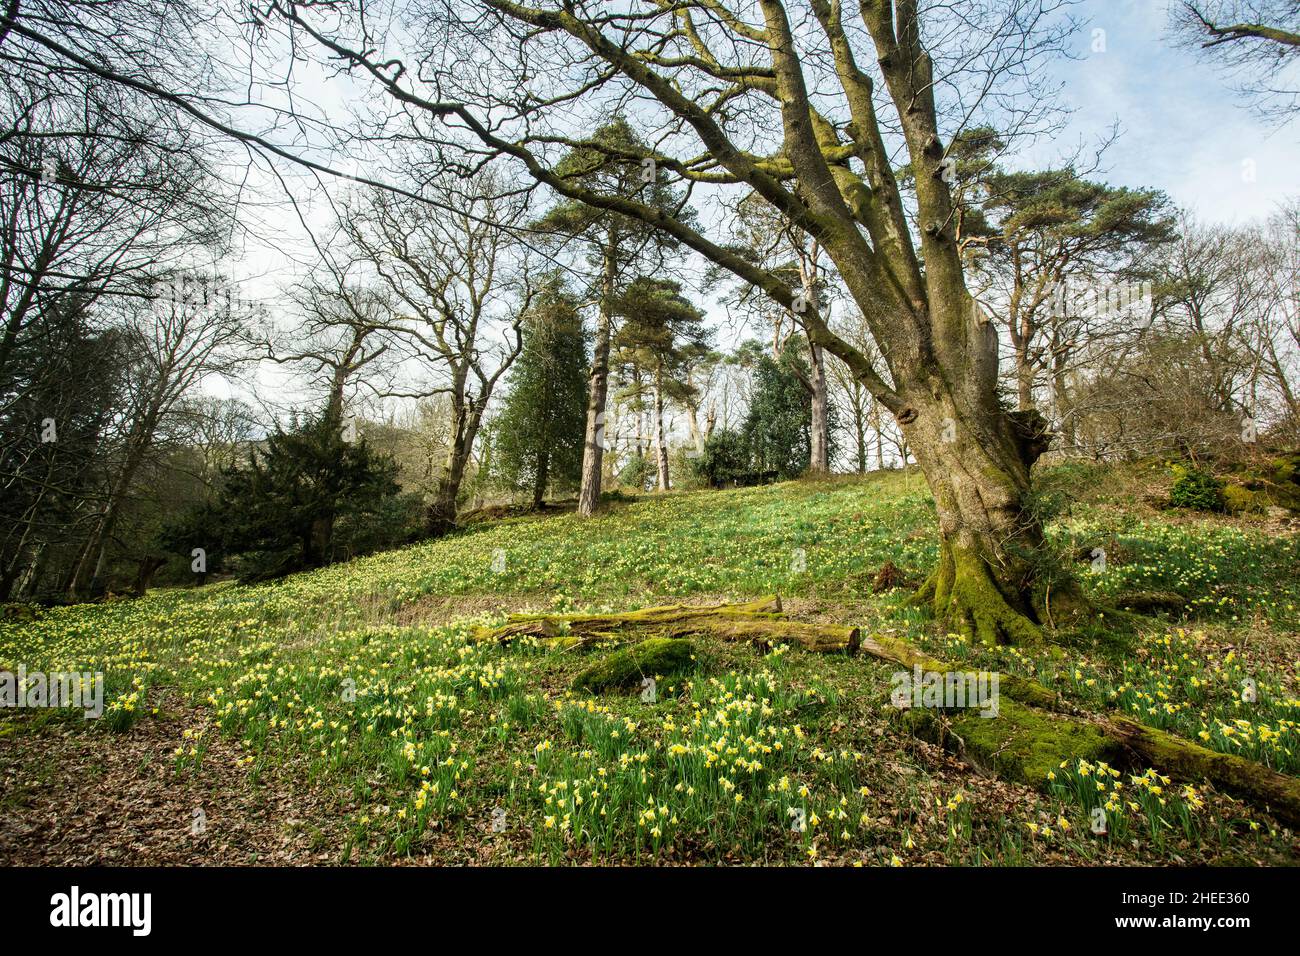 William Wordsworth host of golden daffodils at Dora's Field, Grasmere, The Lake District National Park, Cumbria, England Stock Photo